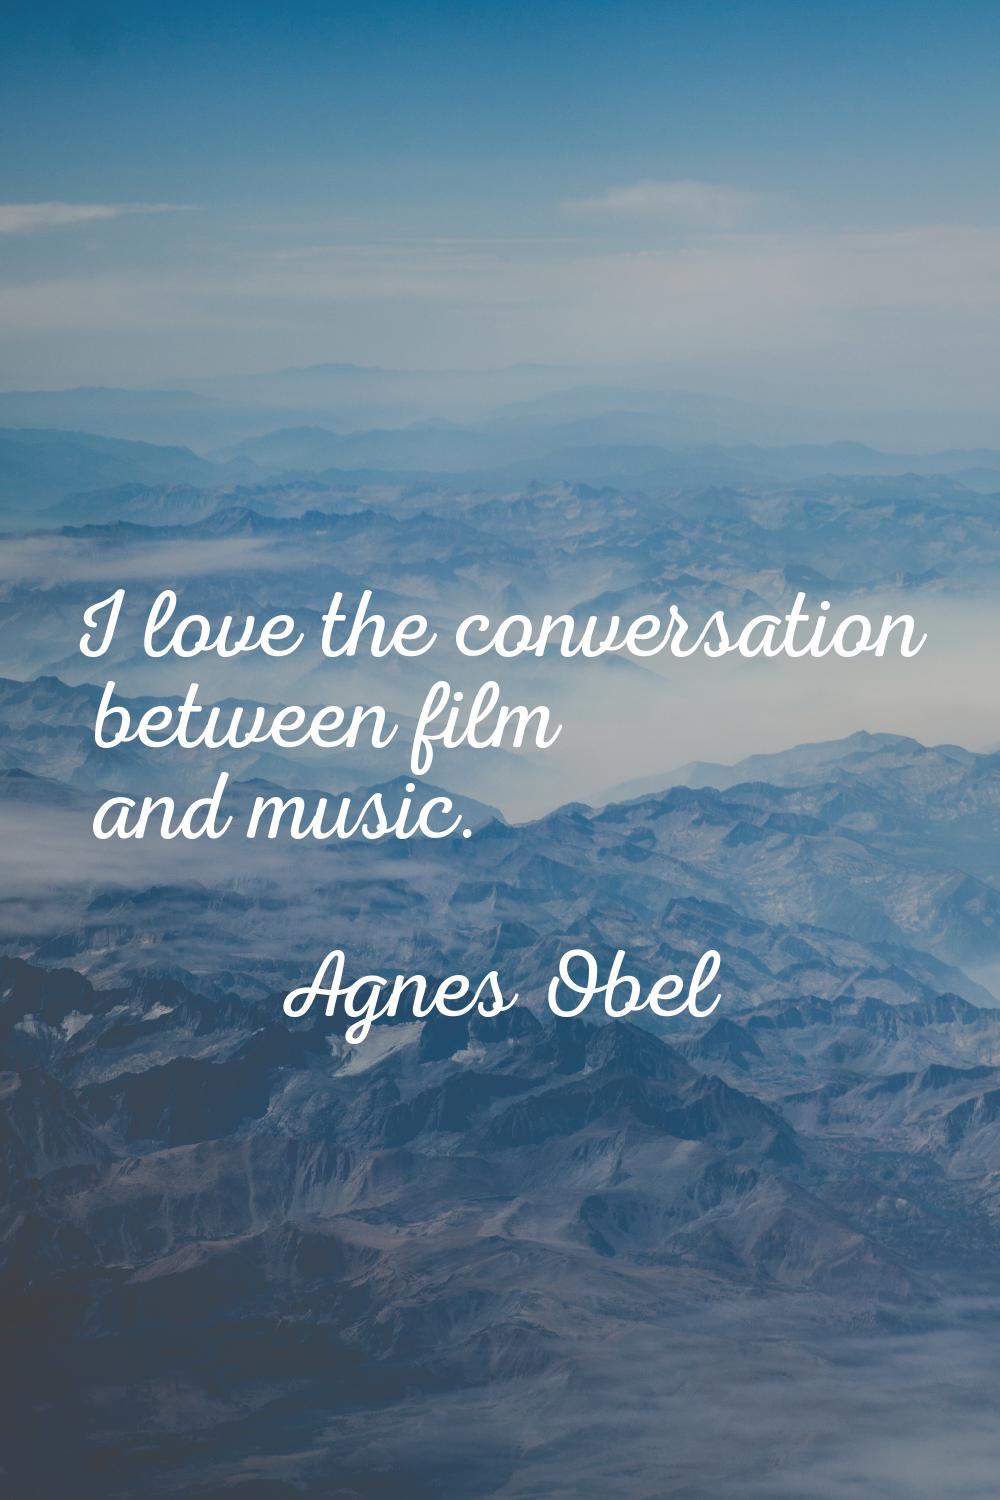 I love the conversation between film and music.